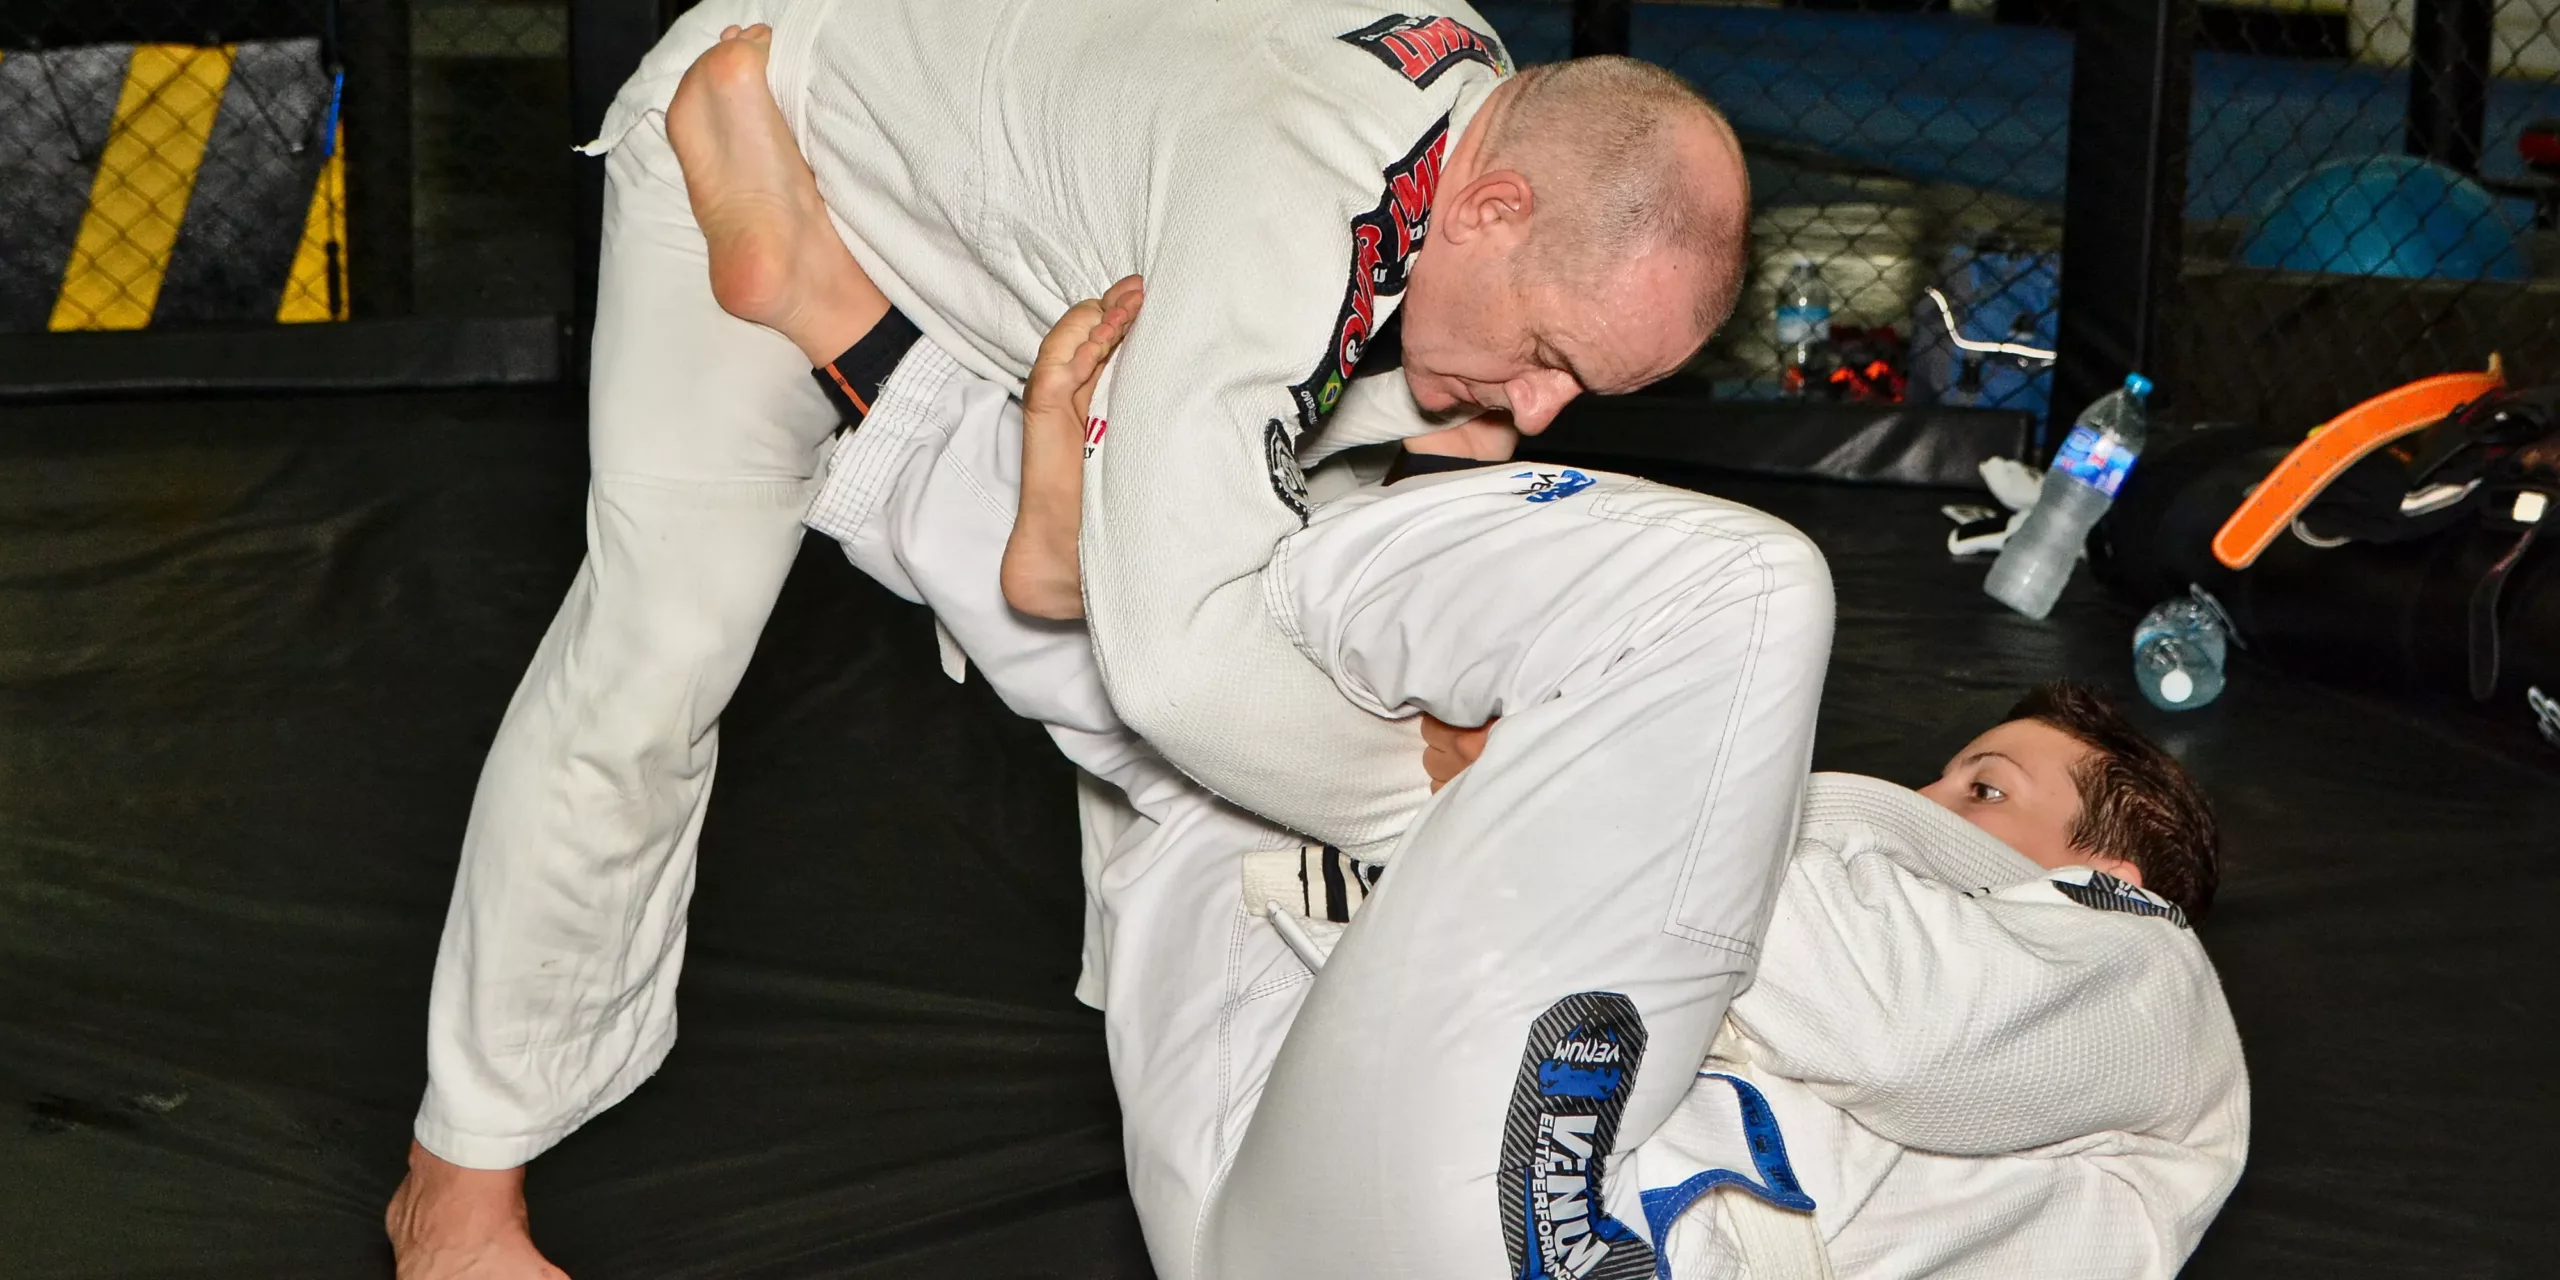 A BJJ practitioner in a white gi works to pass the guard of an opponent, showcasing skill and control in a grappling training session on the mat.